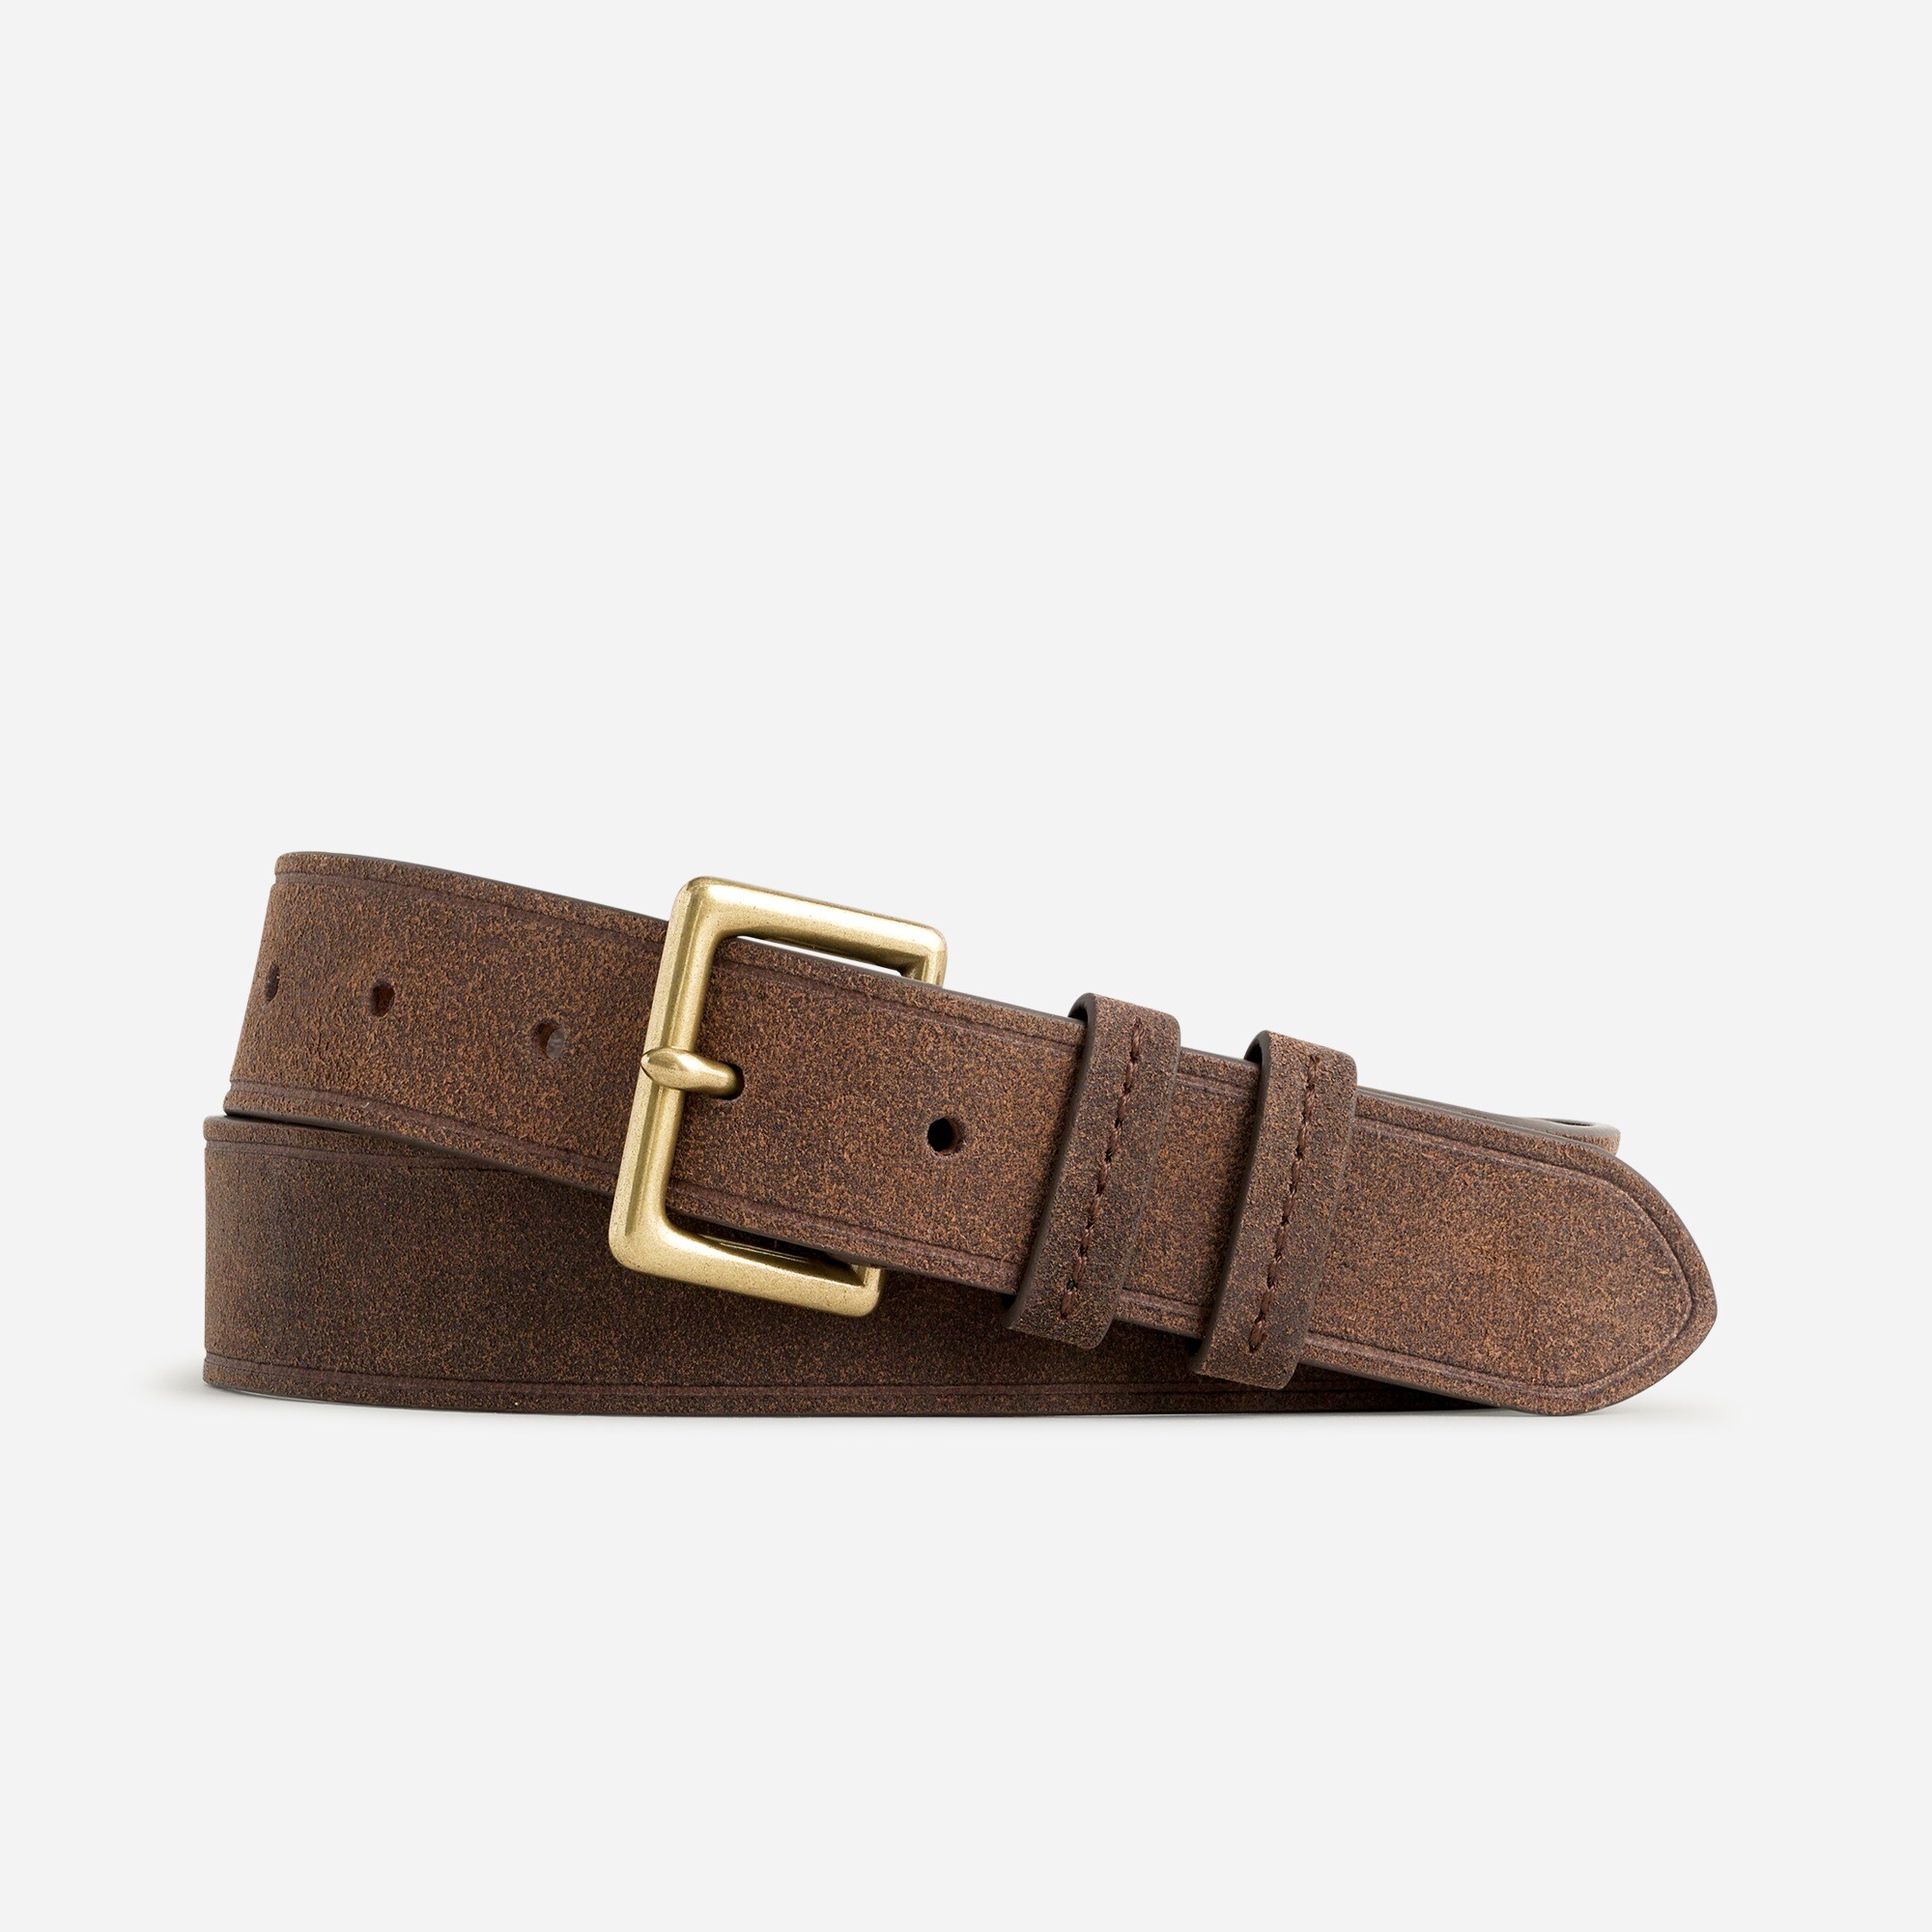  Wallace &amp; Barnes single-prong buckle leather belt